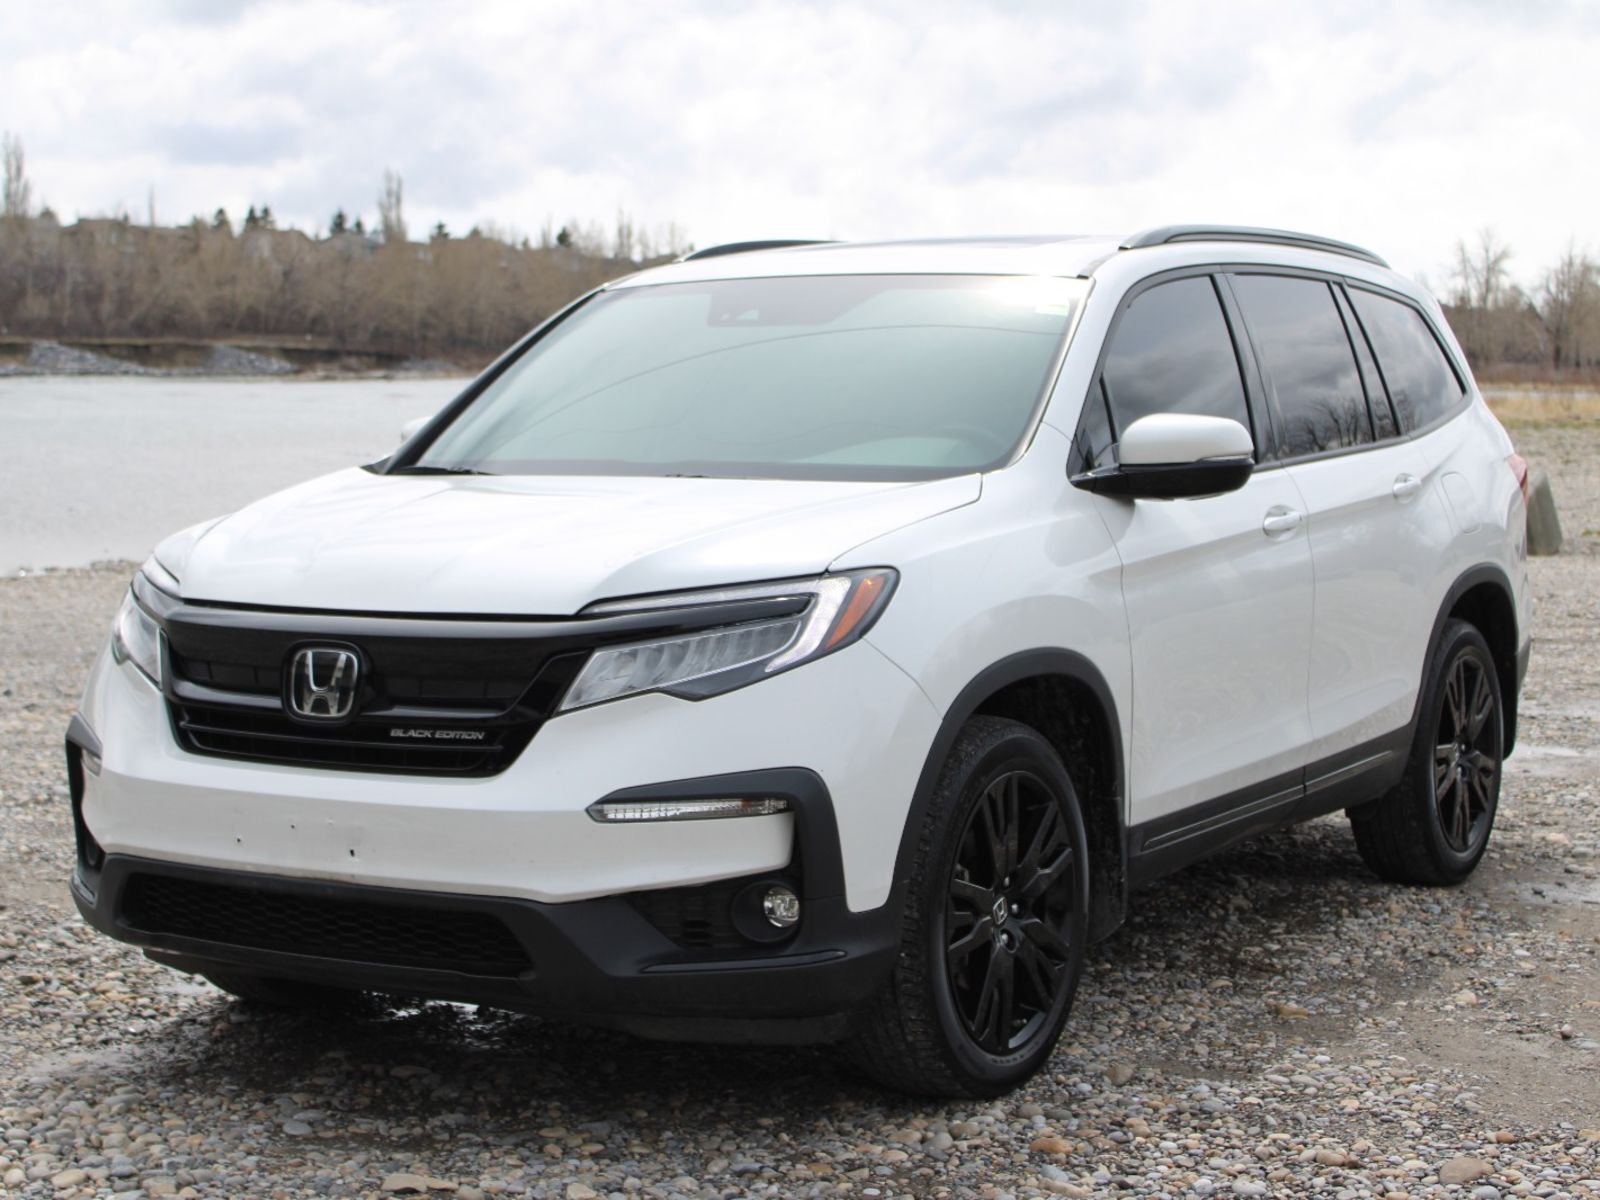 2020 Honda Pilot Black Edition - One Owner - Clean Carfax